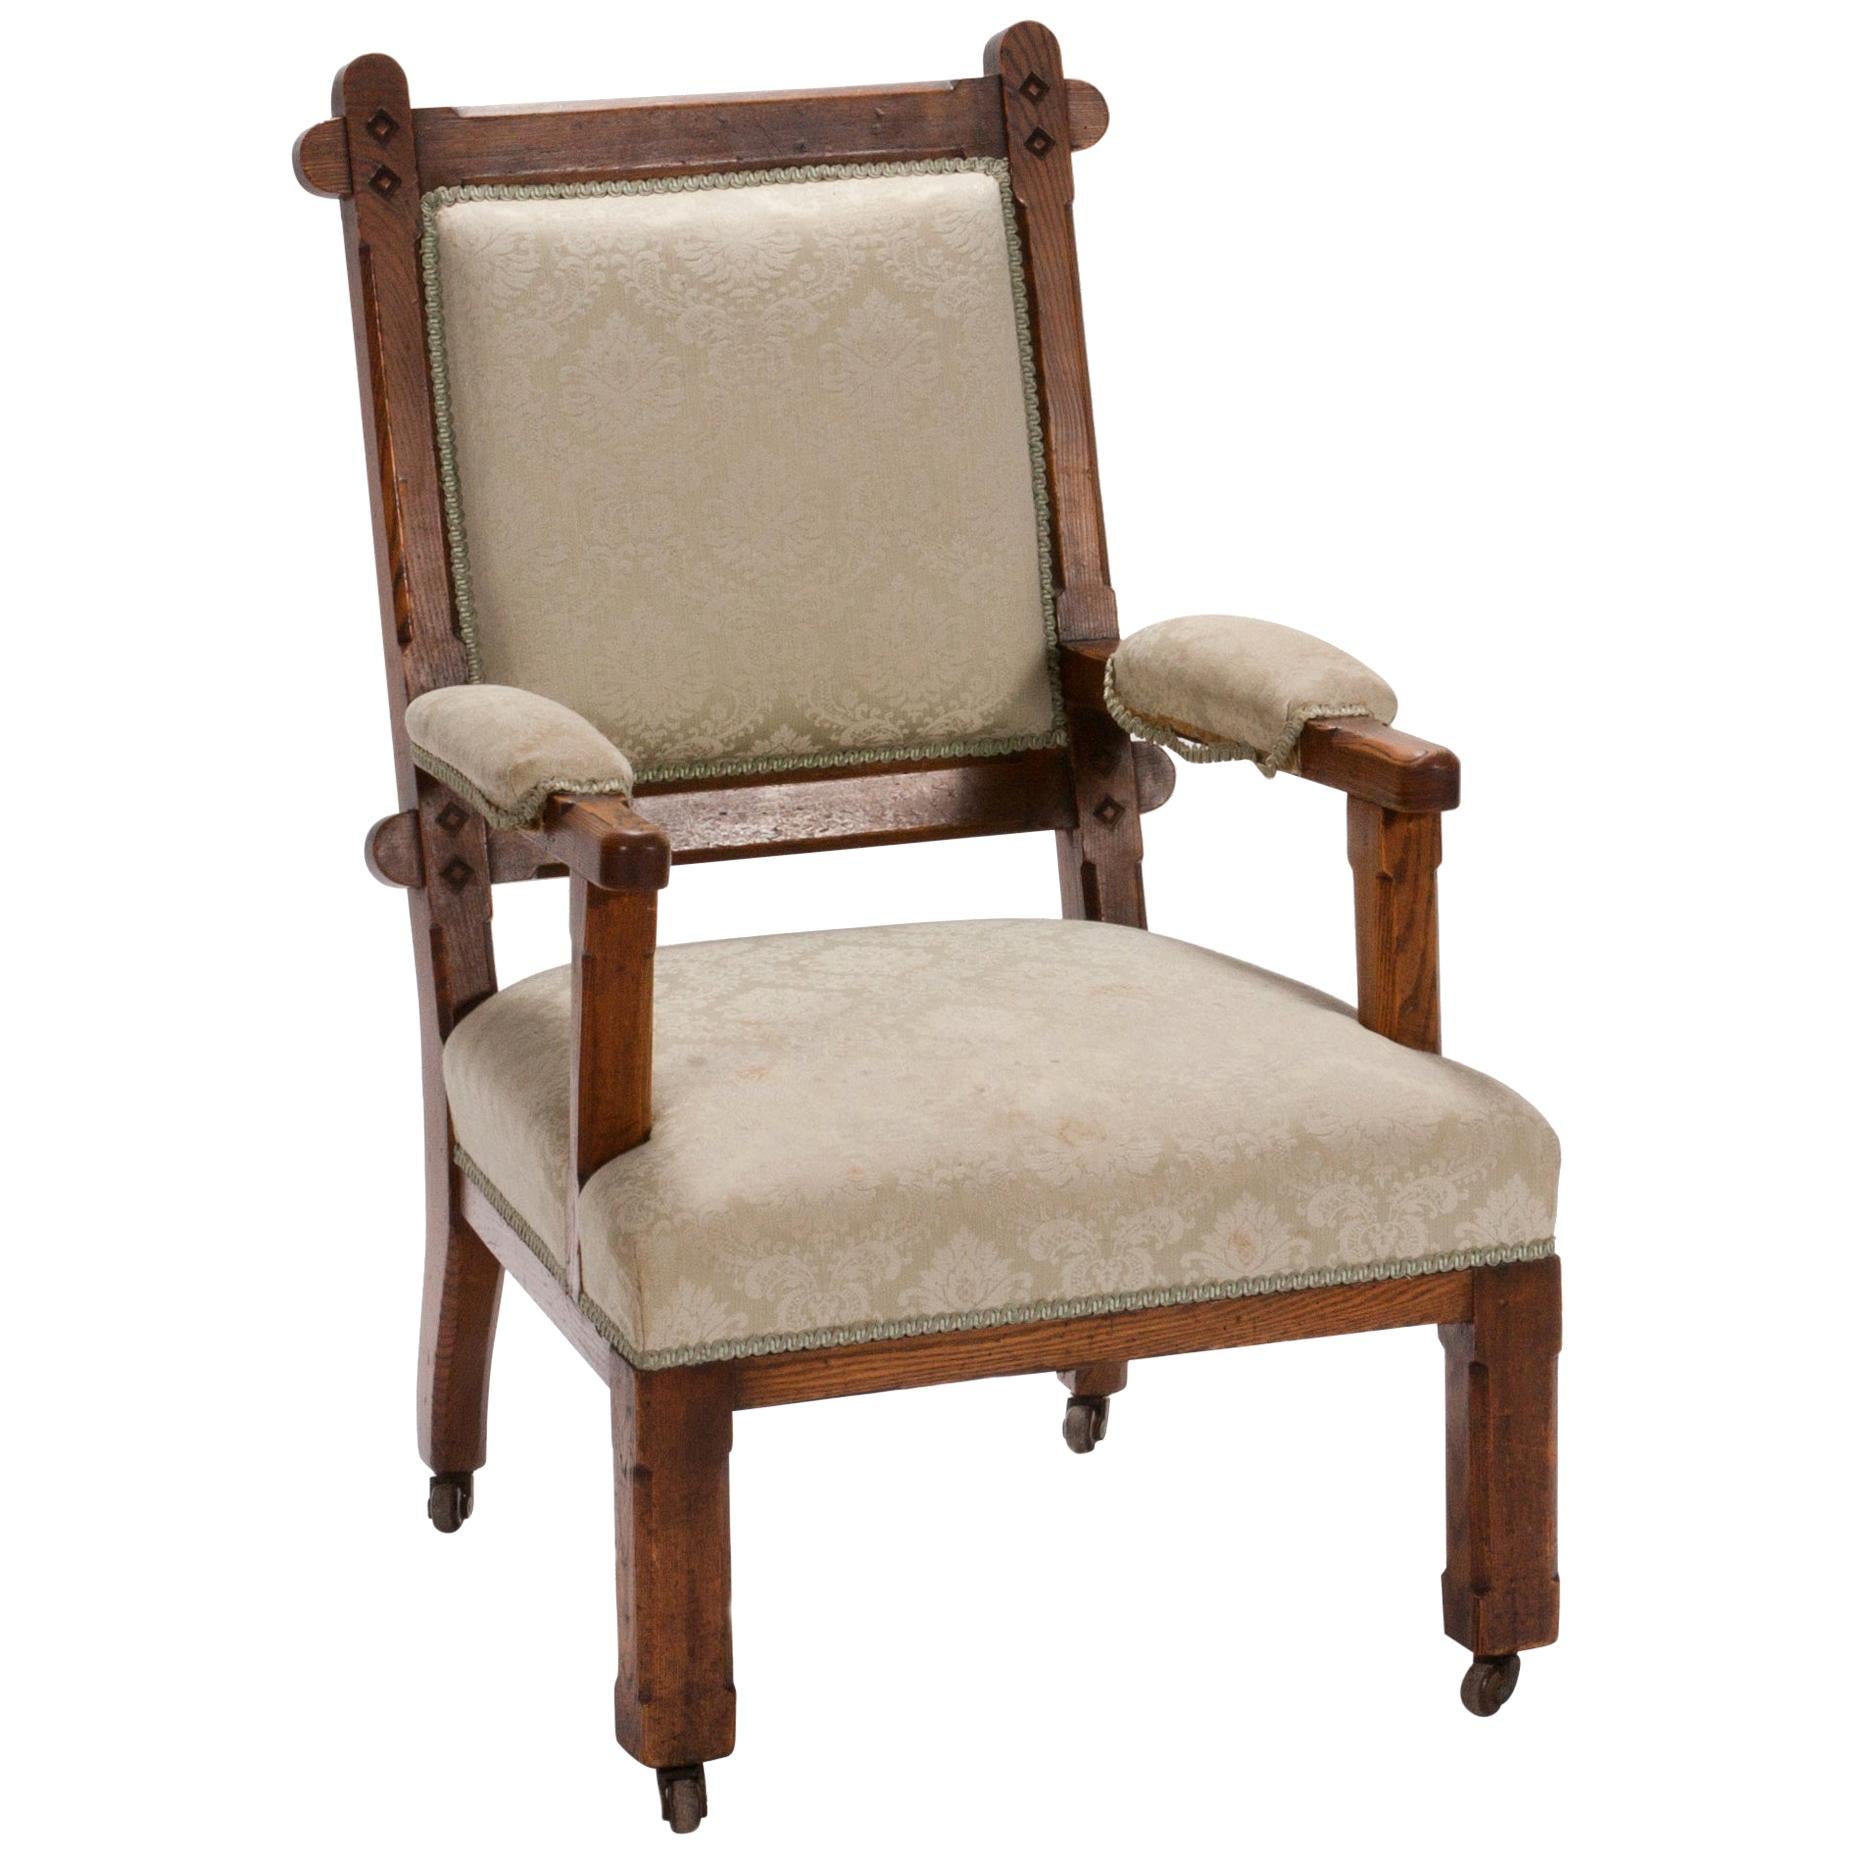 Early 20th Century English Arts & Crafts Oak Chair